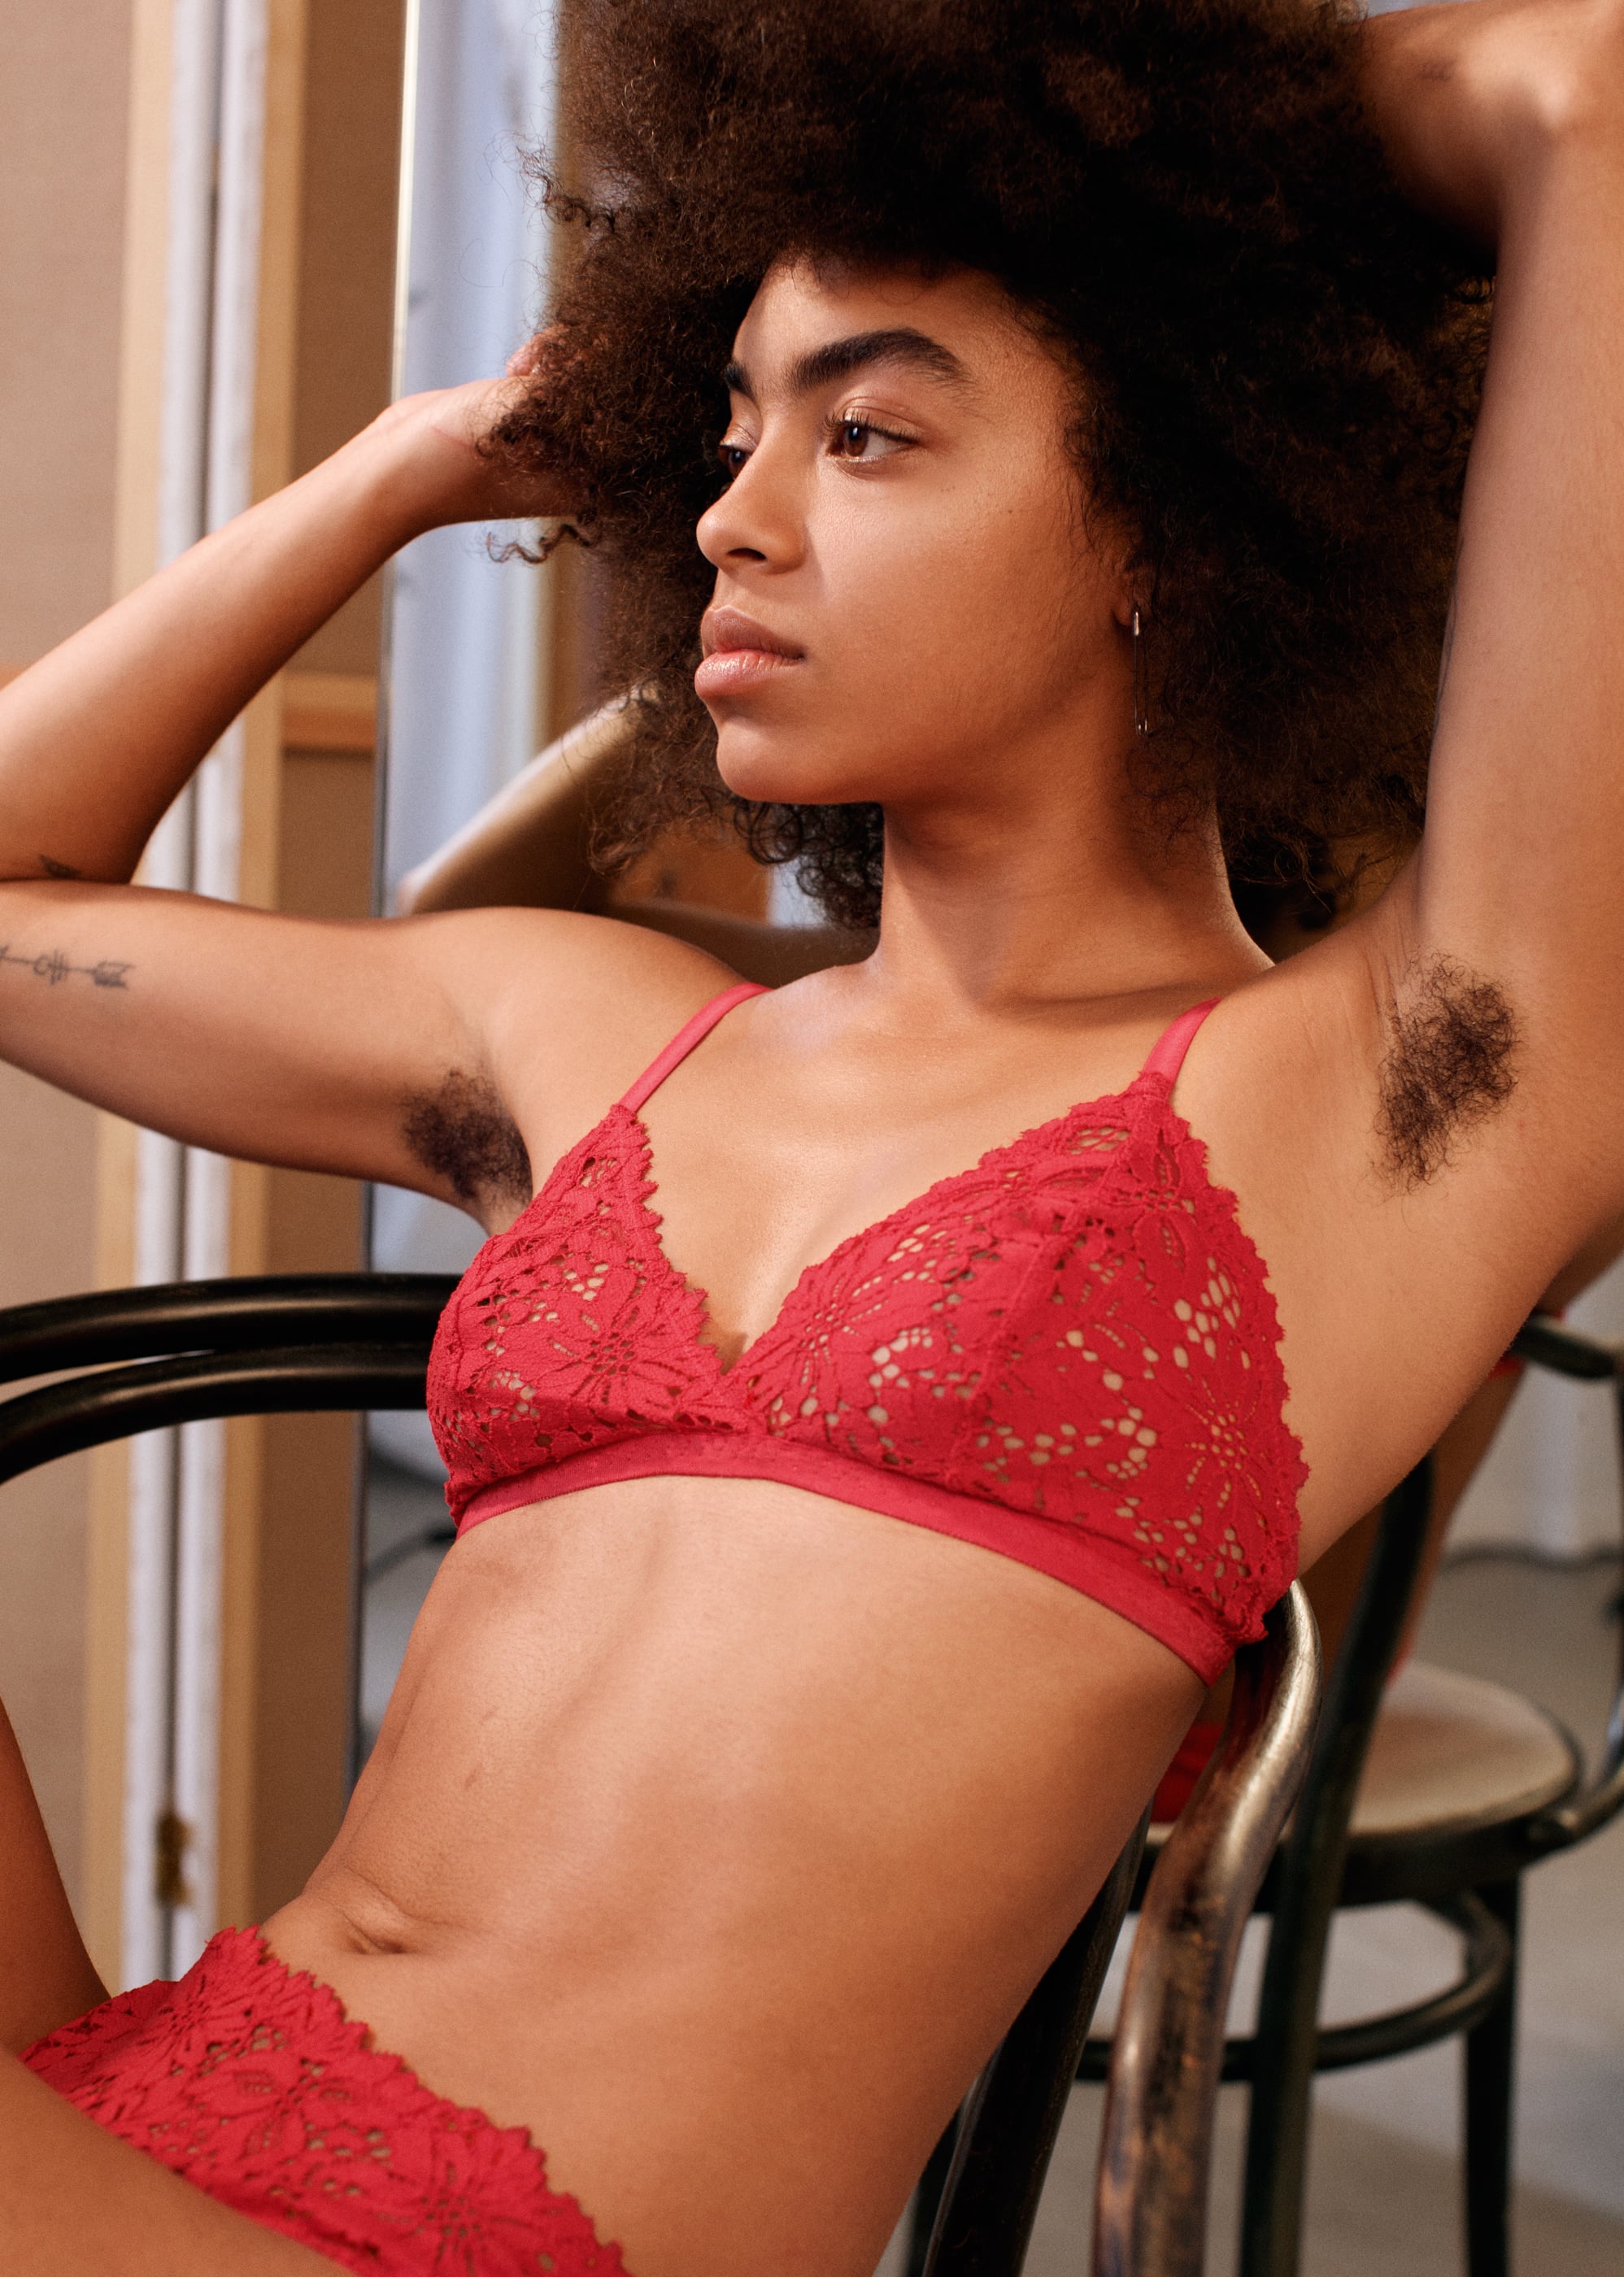 And Other Stories Lingerie Campaign Fall 2015